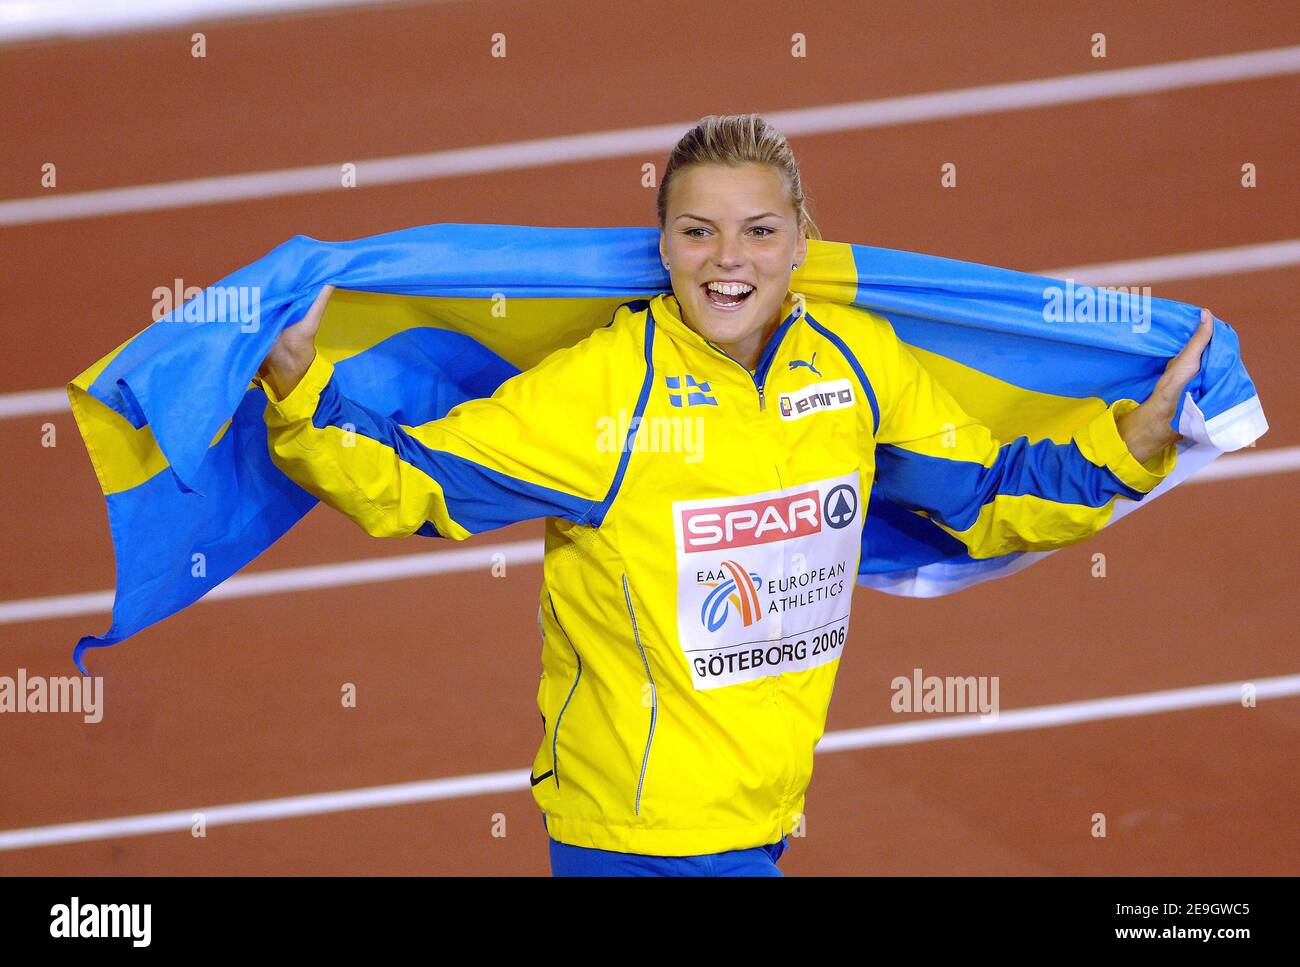 Sweden's Susanna Kallur celebrates after winning the Women's 100m Hurdles final at the European Track and Field Championships, in Goteborg, Sweden, on August 11, 2006. Photo by Guibbaud-Kempinaire/Cameleon/ABACAPRESS.COM Stock Photo